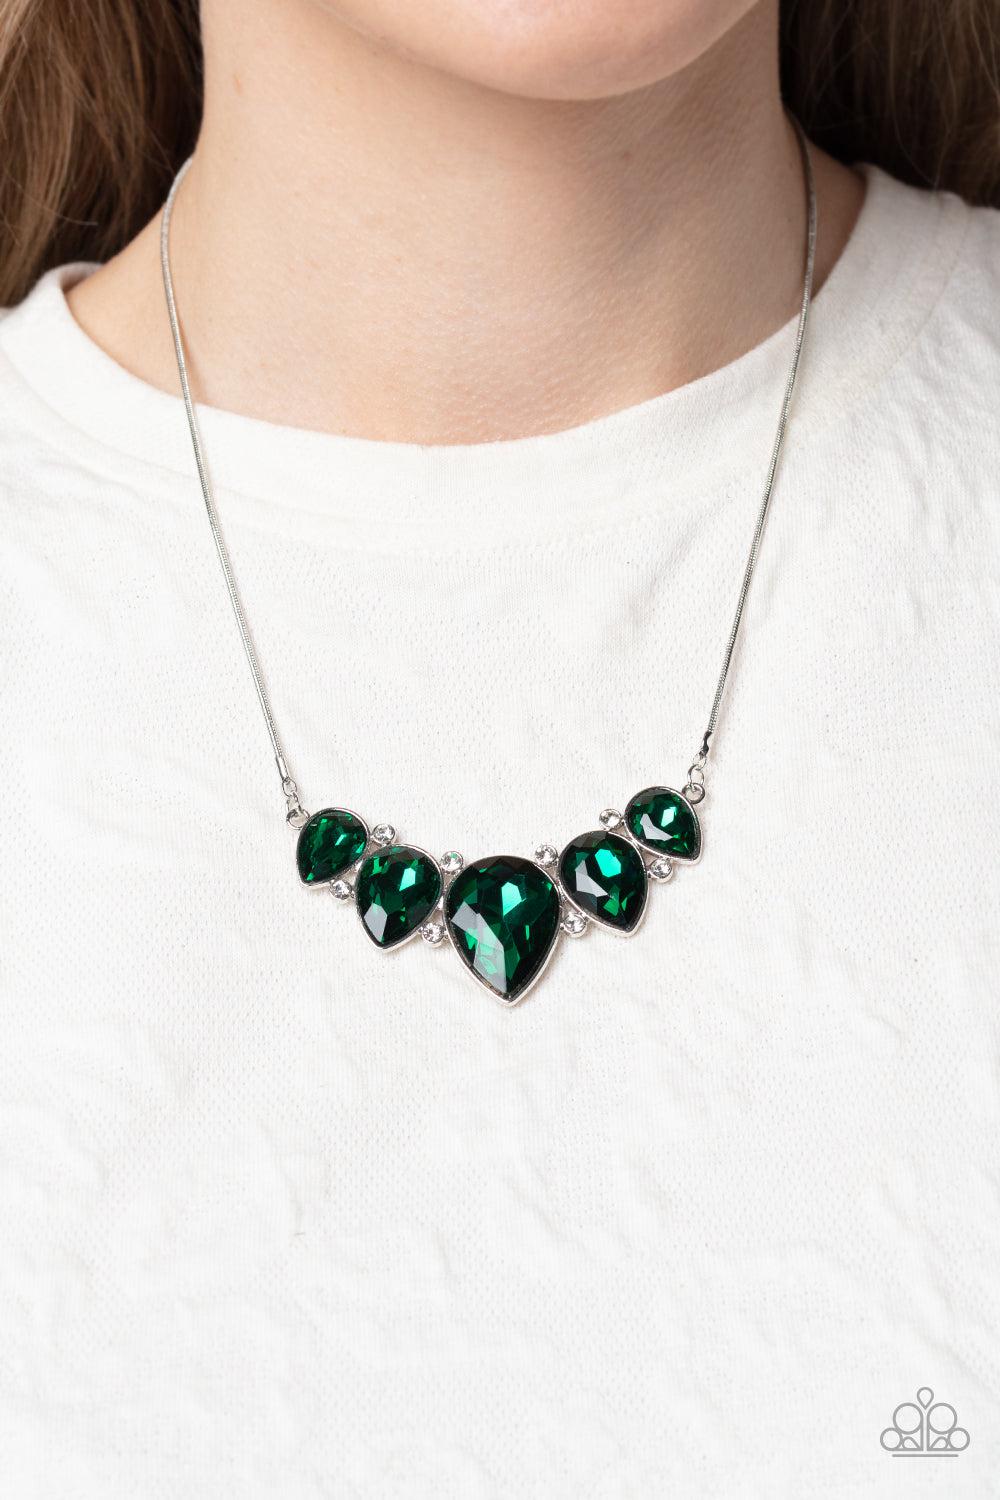 Regally Refined Green Rhinestone Necklace - Paparazzi Accessories- lightbox - CarasShop.com - $5 Jewelry by Cara Jewels